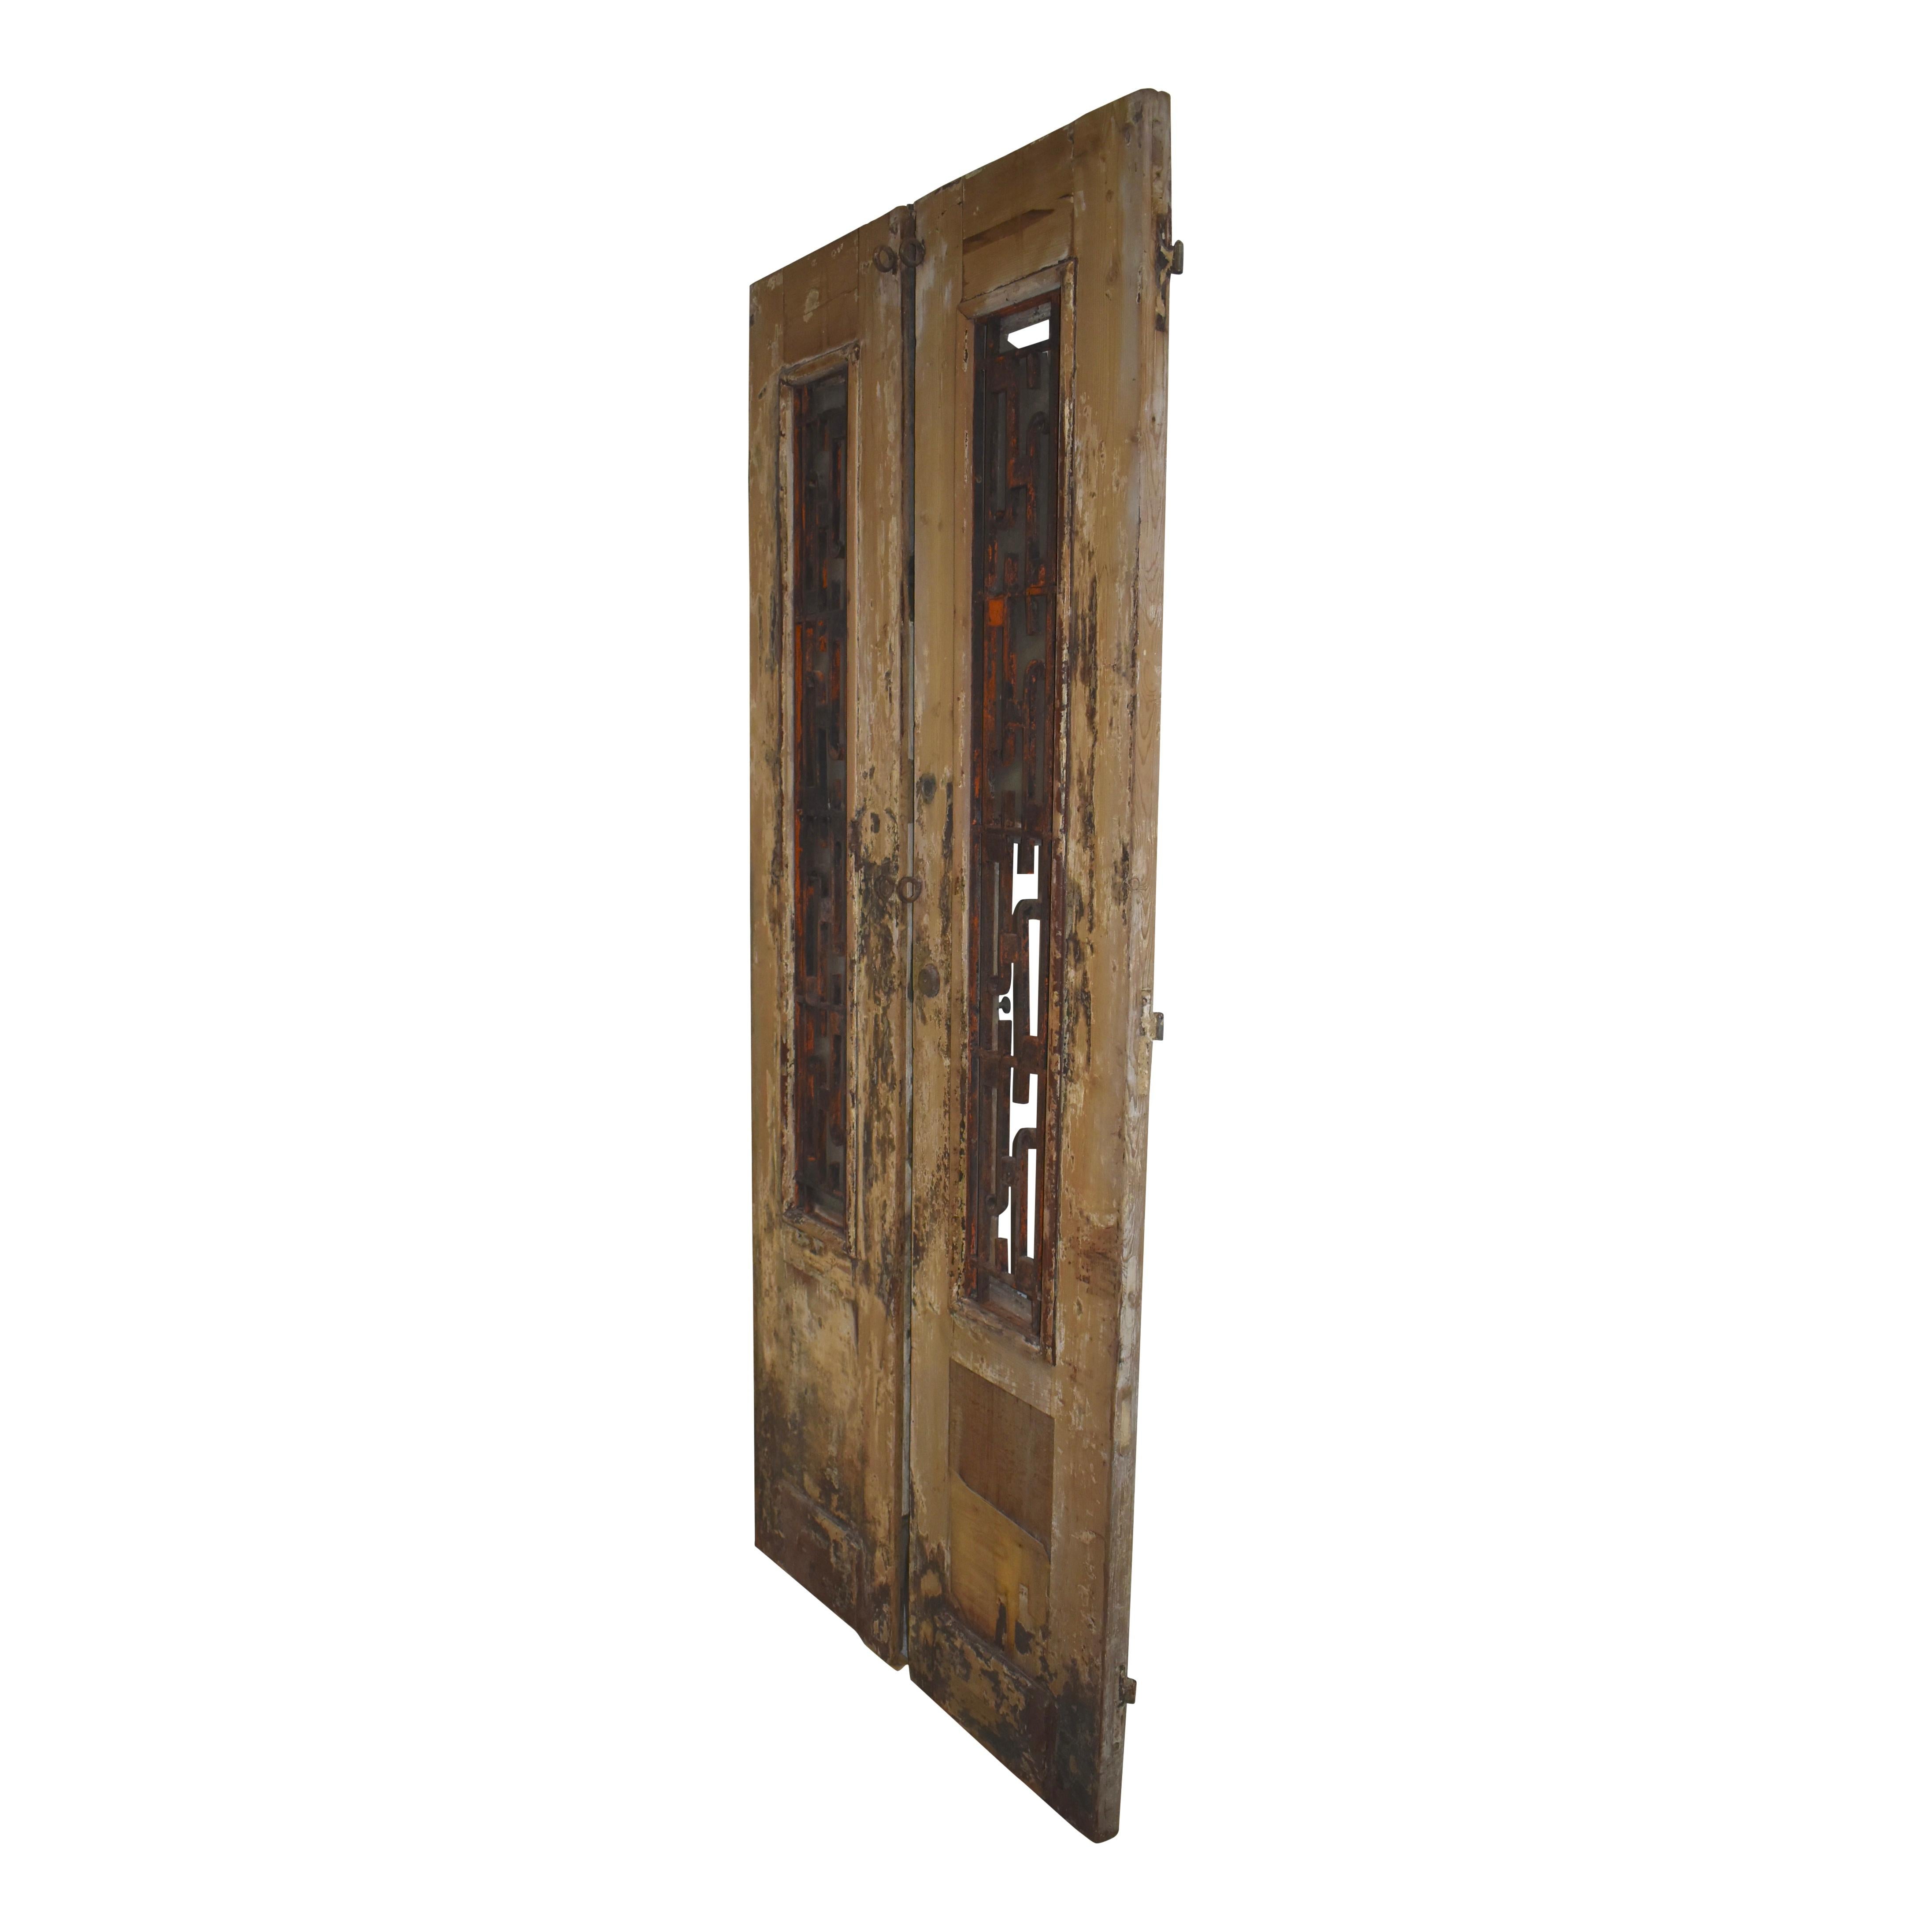 Made of Eastern European pine as is often the case in Egyptian doors, this rustic set features an English Union lock, veneer lower panels, and window frames on the upper halves, enclosing decorative iron work. Each door has frosted vintage glass in